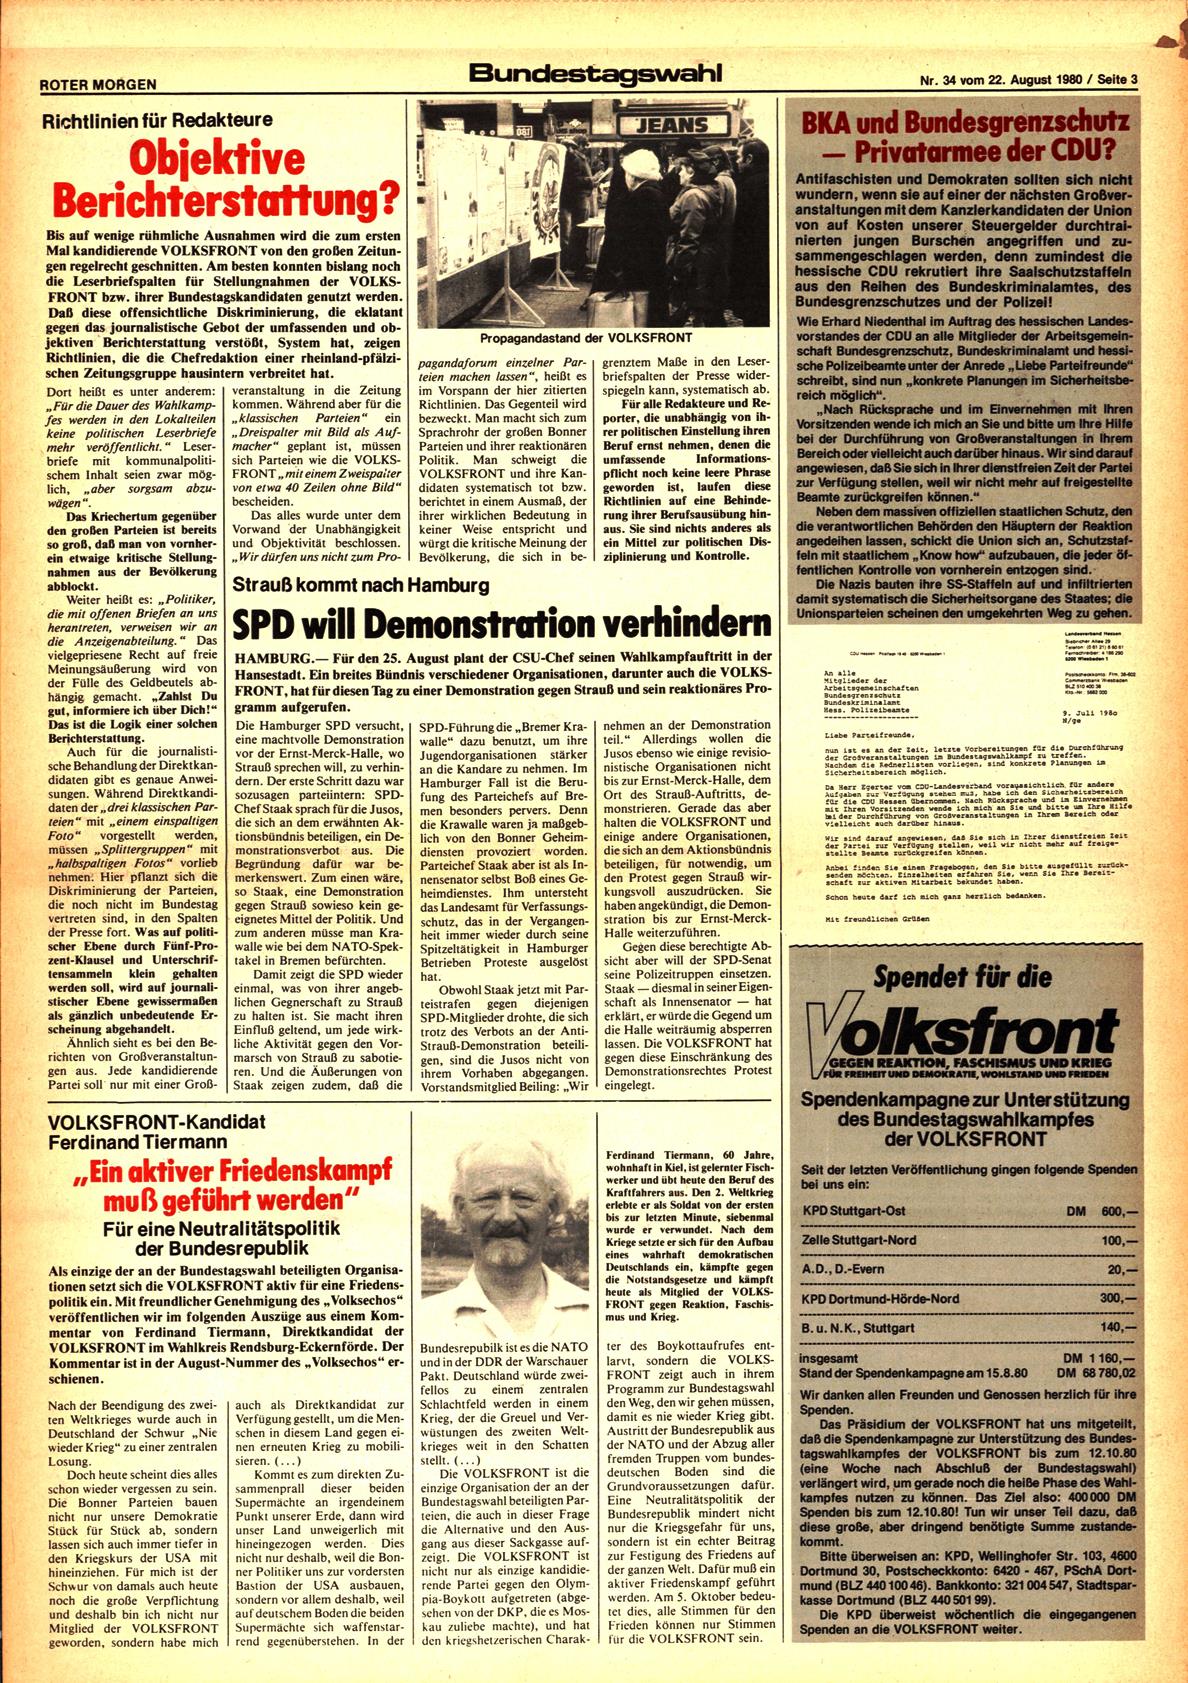 Roter Morgen, 14. Jg., 22. August 1980, Nr. 34, Seite 3